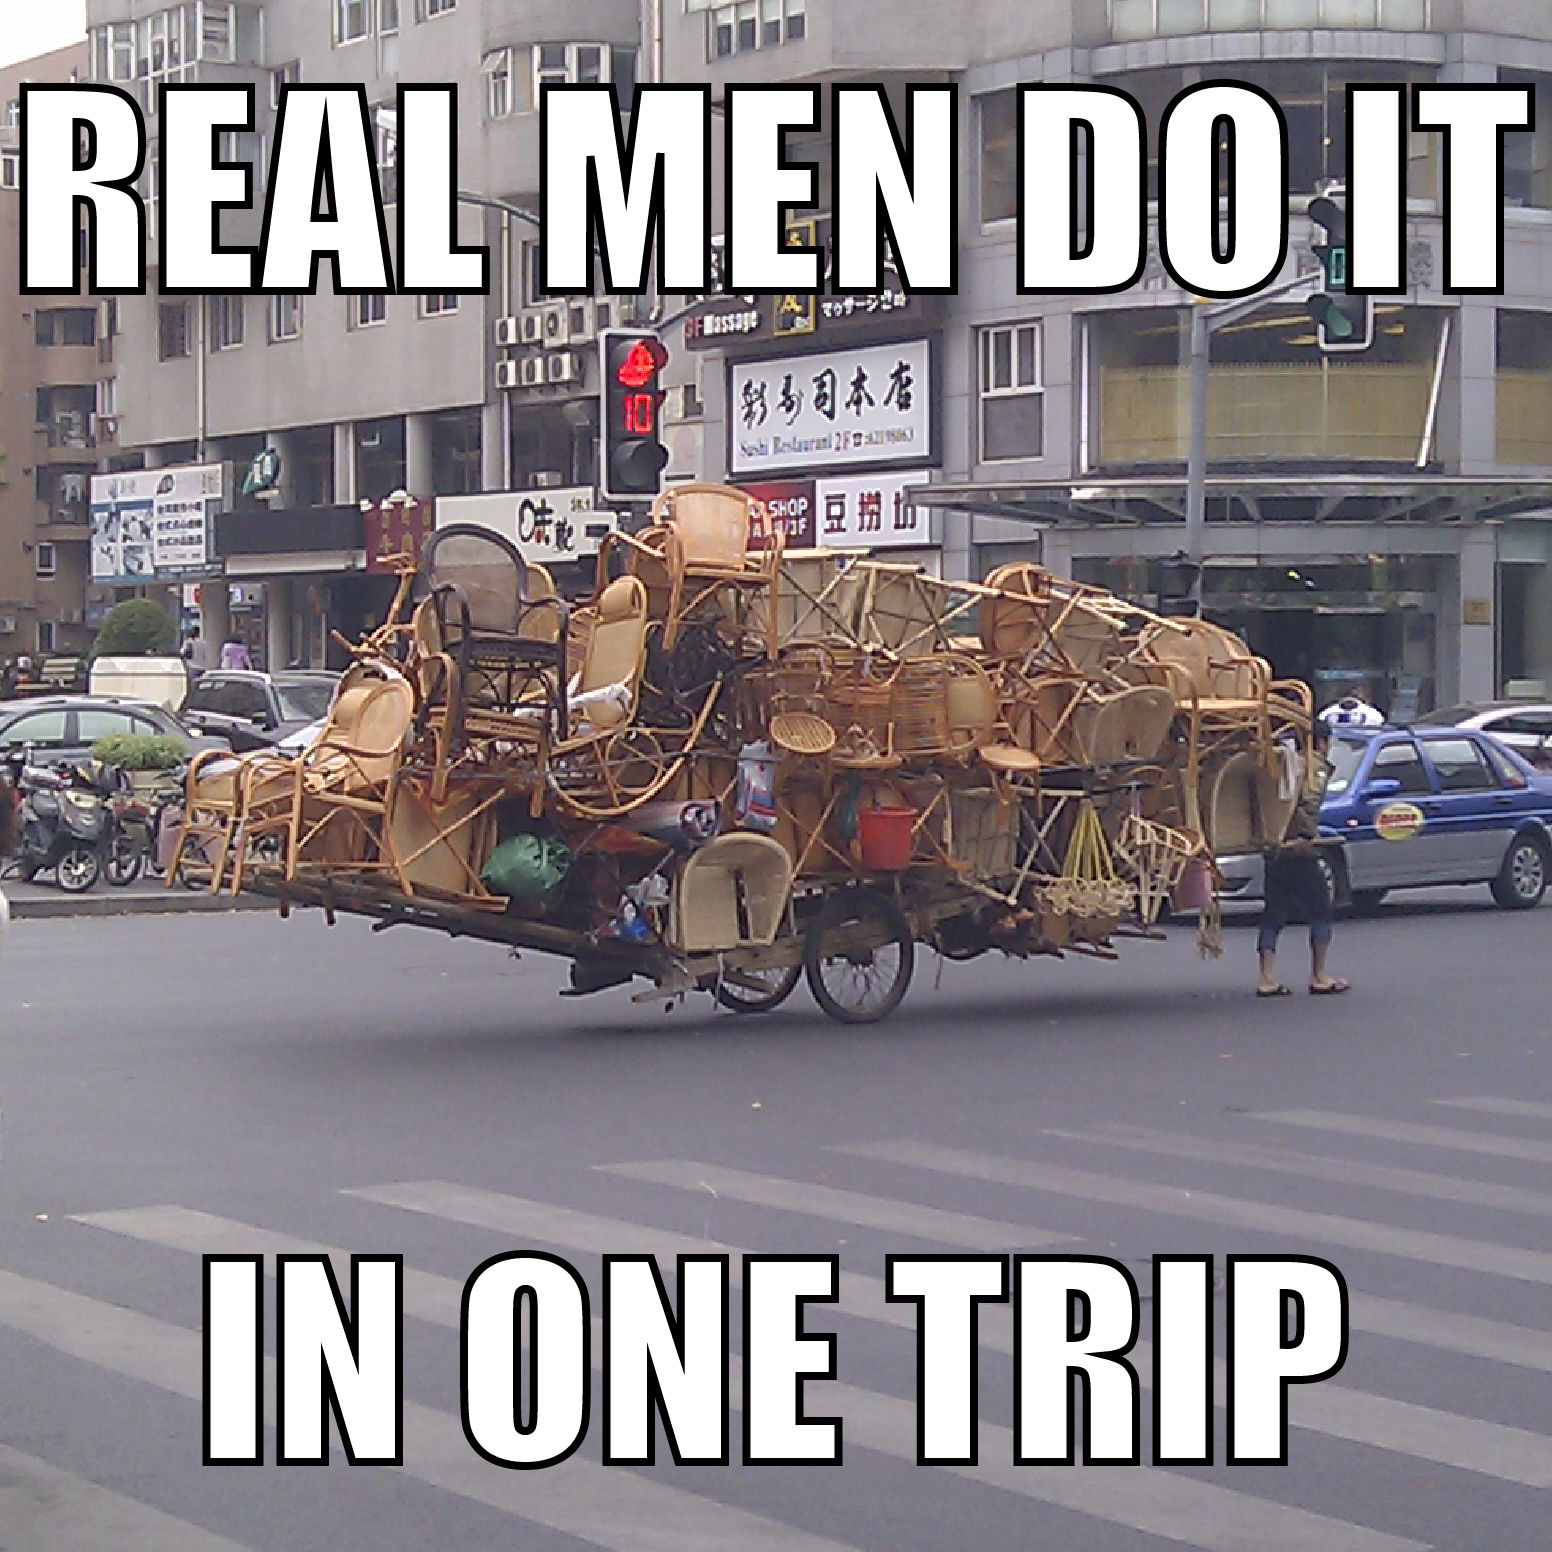 Two trips? that!. .. HE'S A MAN!